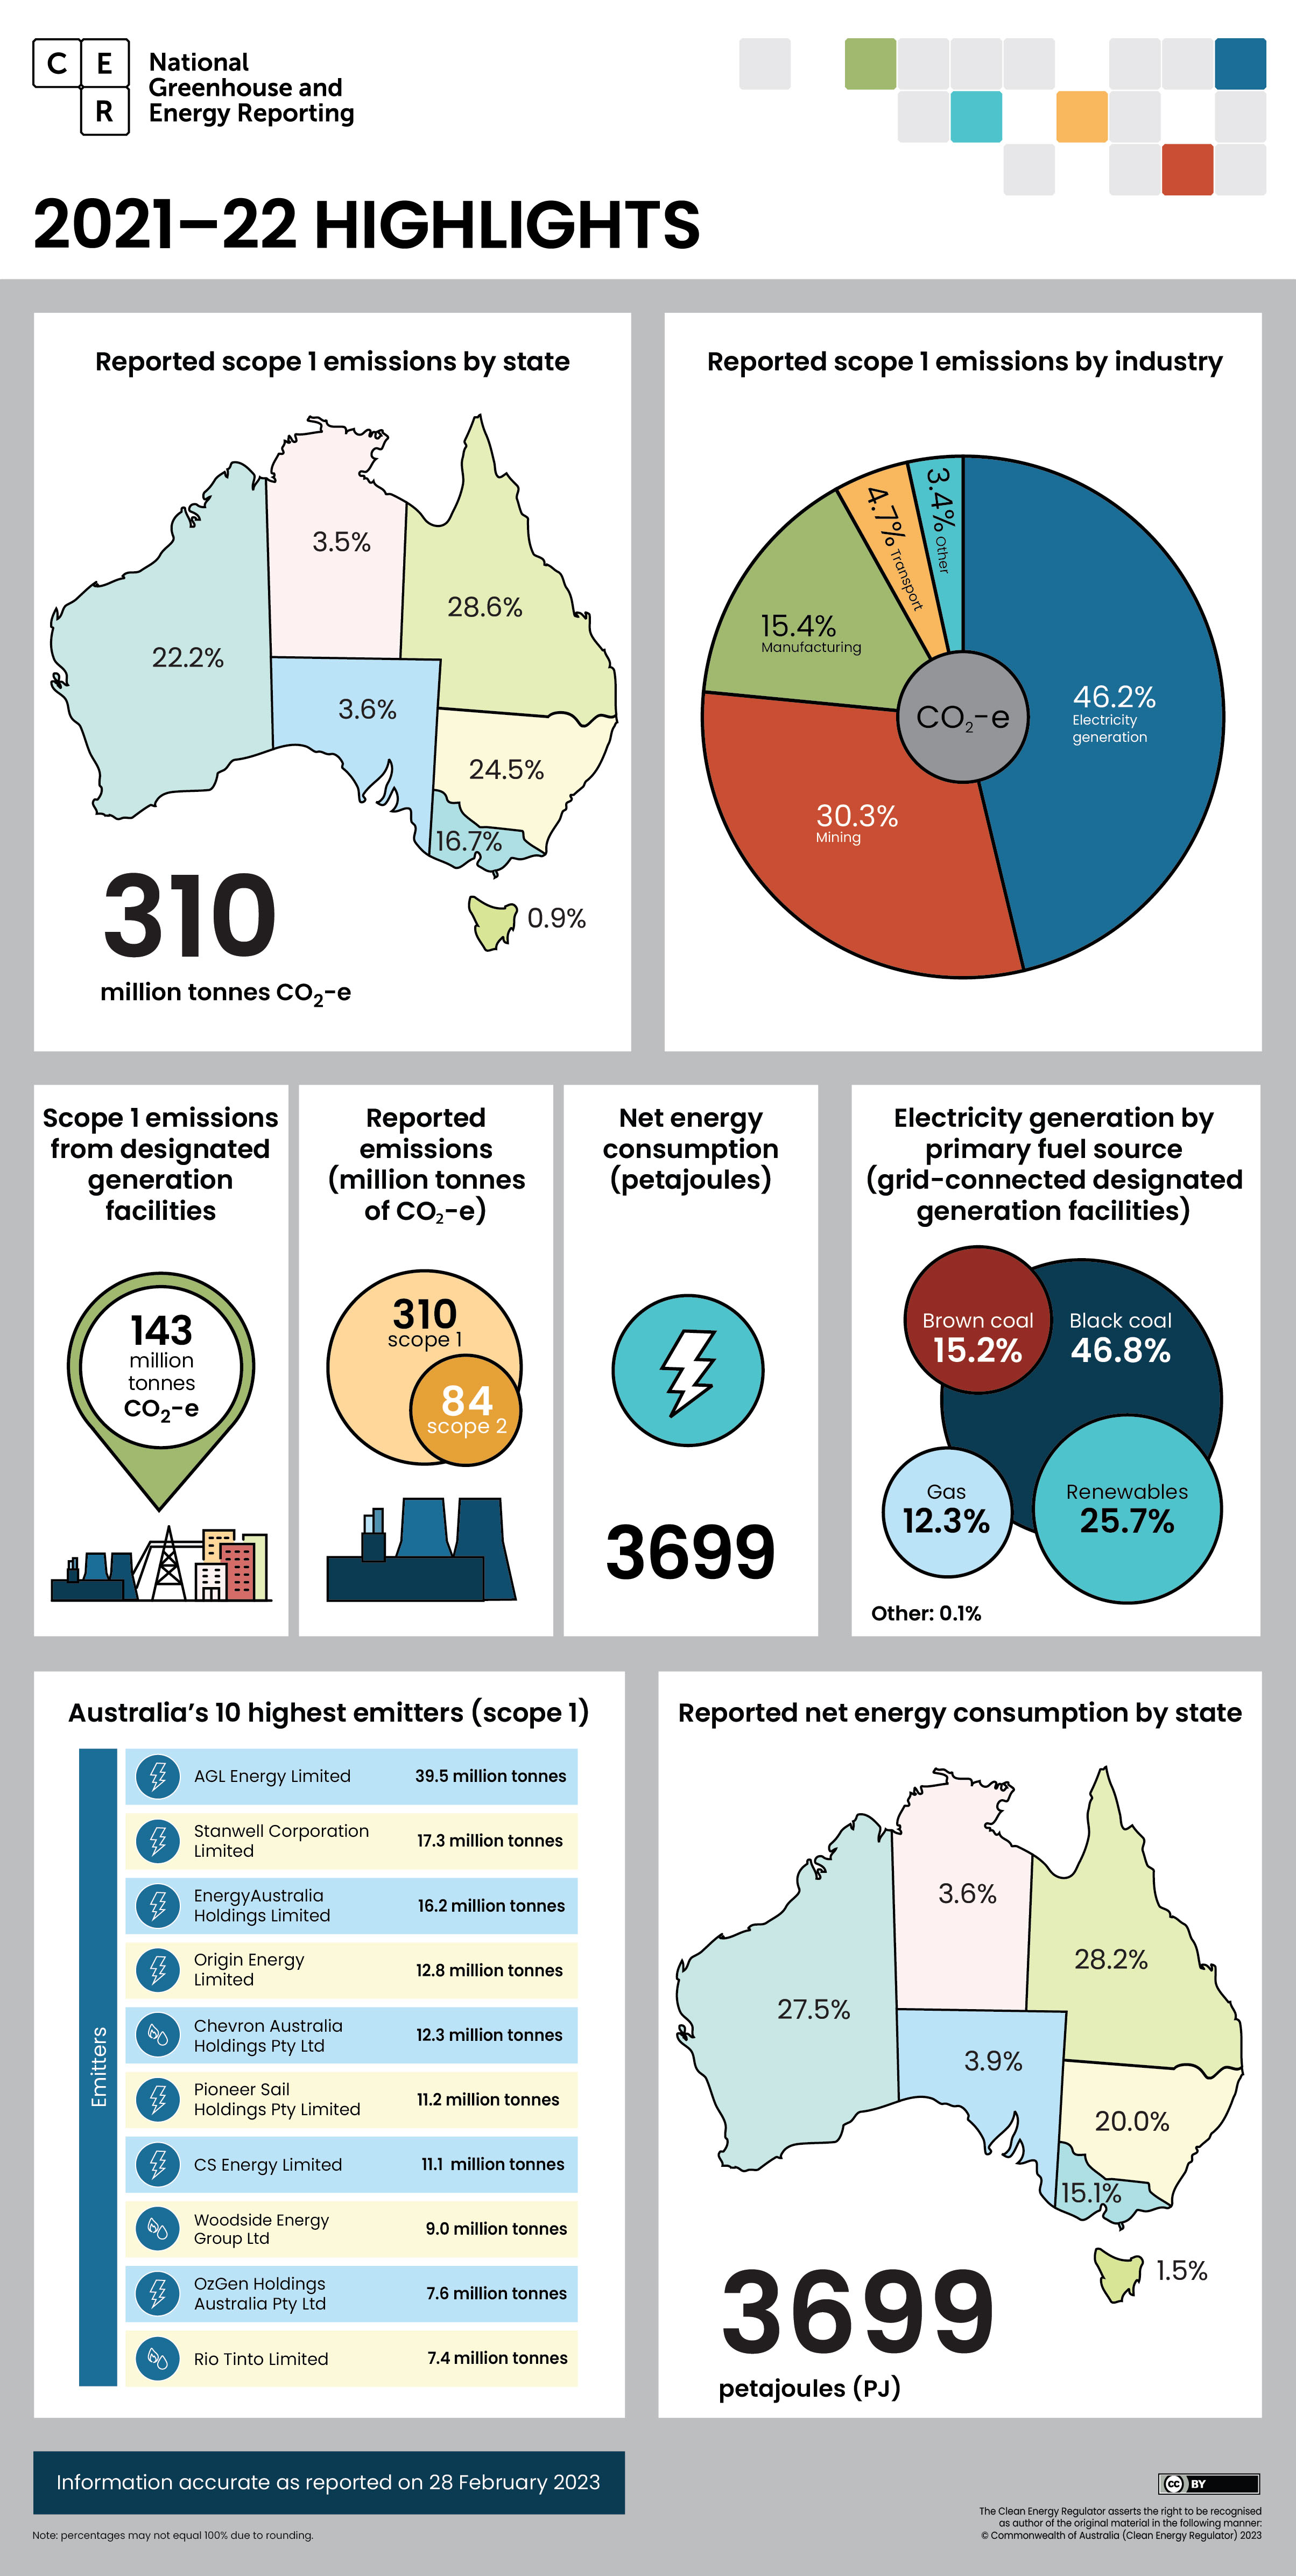 Infographic showing data highlights for the 2021-22 reporting period